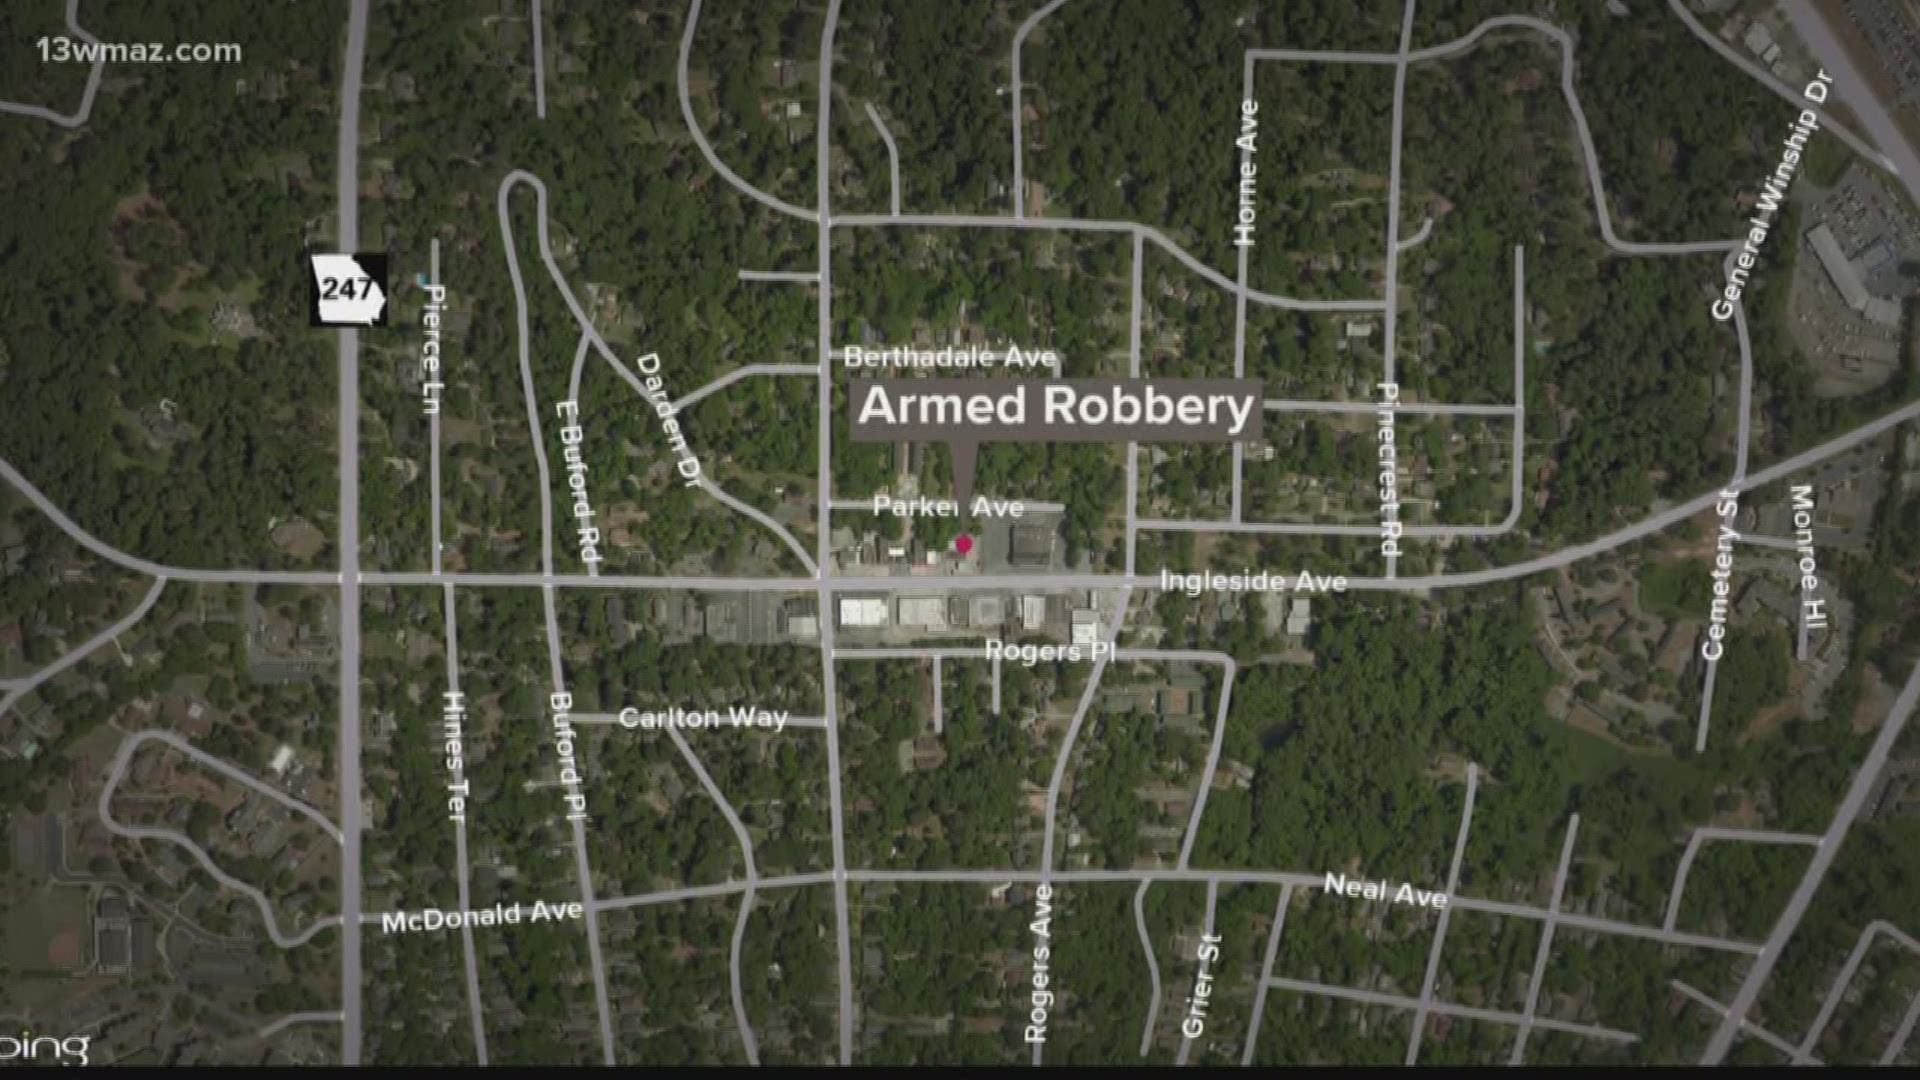 The Bibb County Sheriff's Office says the USA Grocery #3 on Ingleside Avenue was robbed at gunpoint by two men Saturday night. They got away with an undisclosed amount of money, and no one was injured during the robbery.